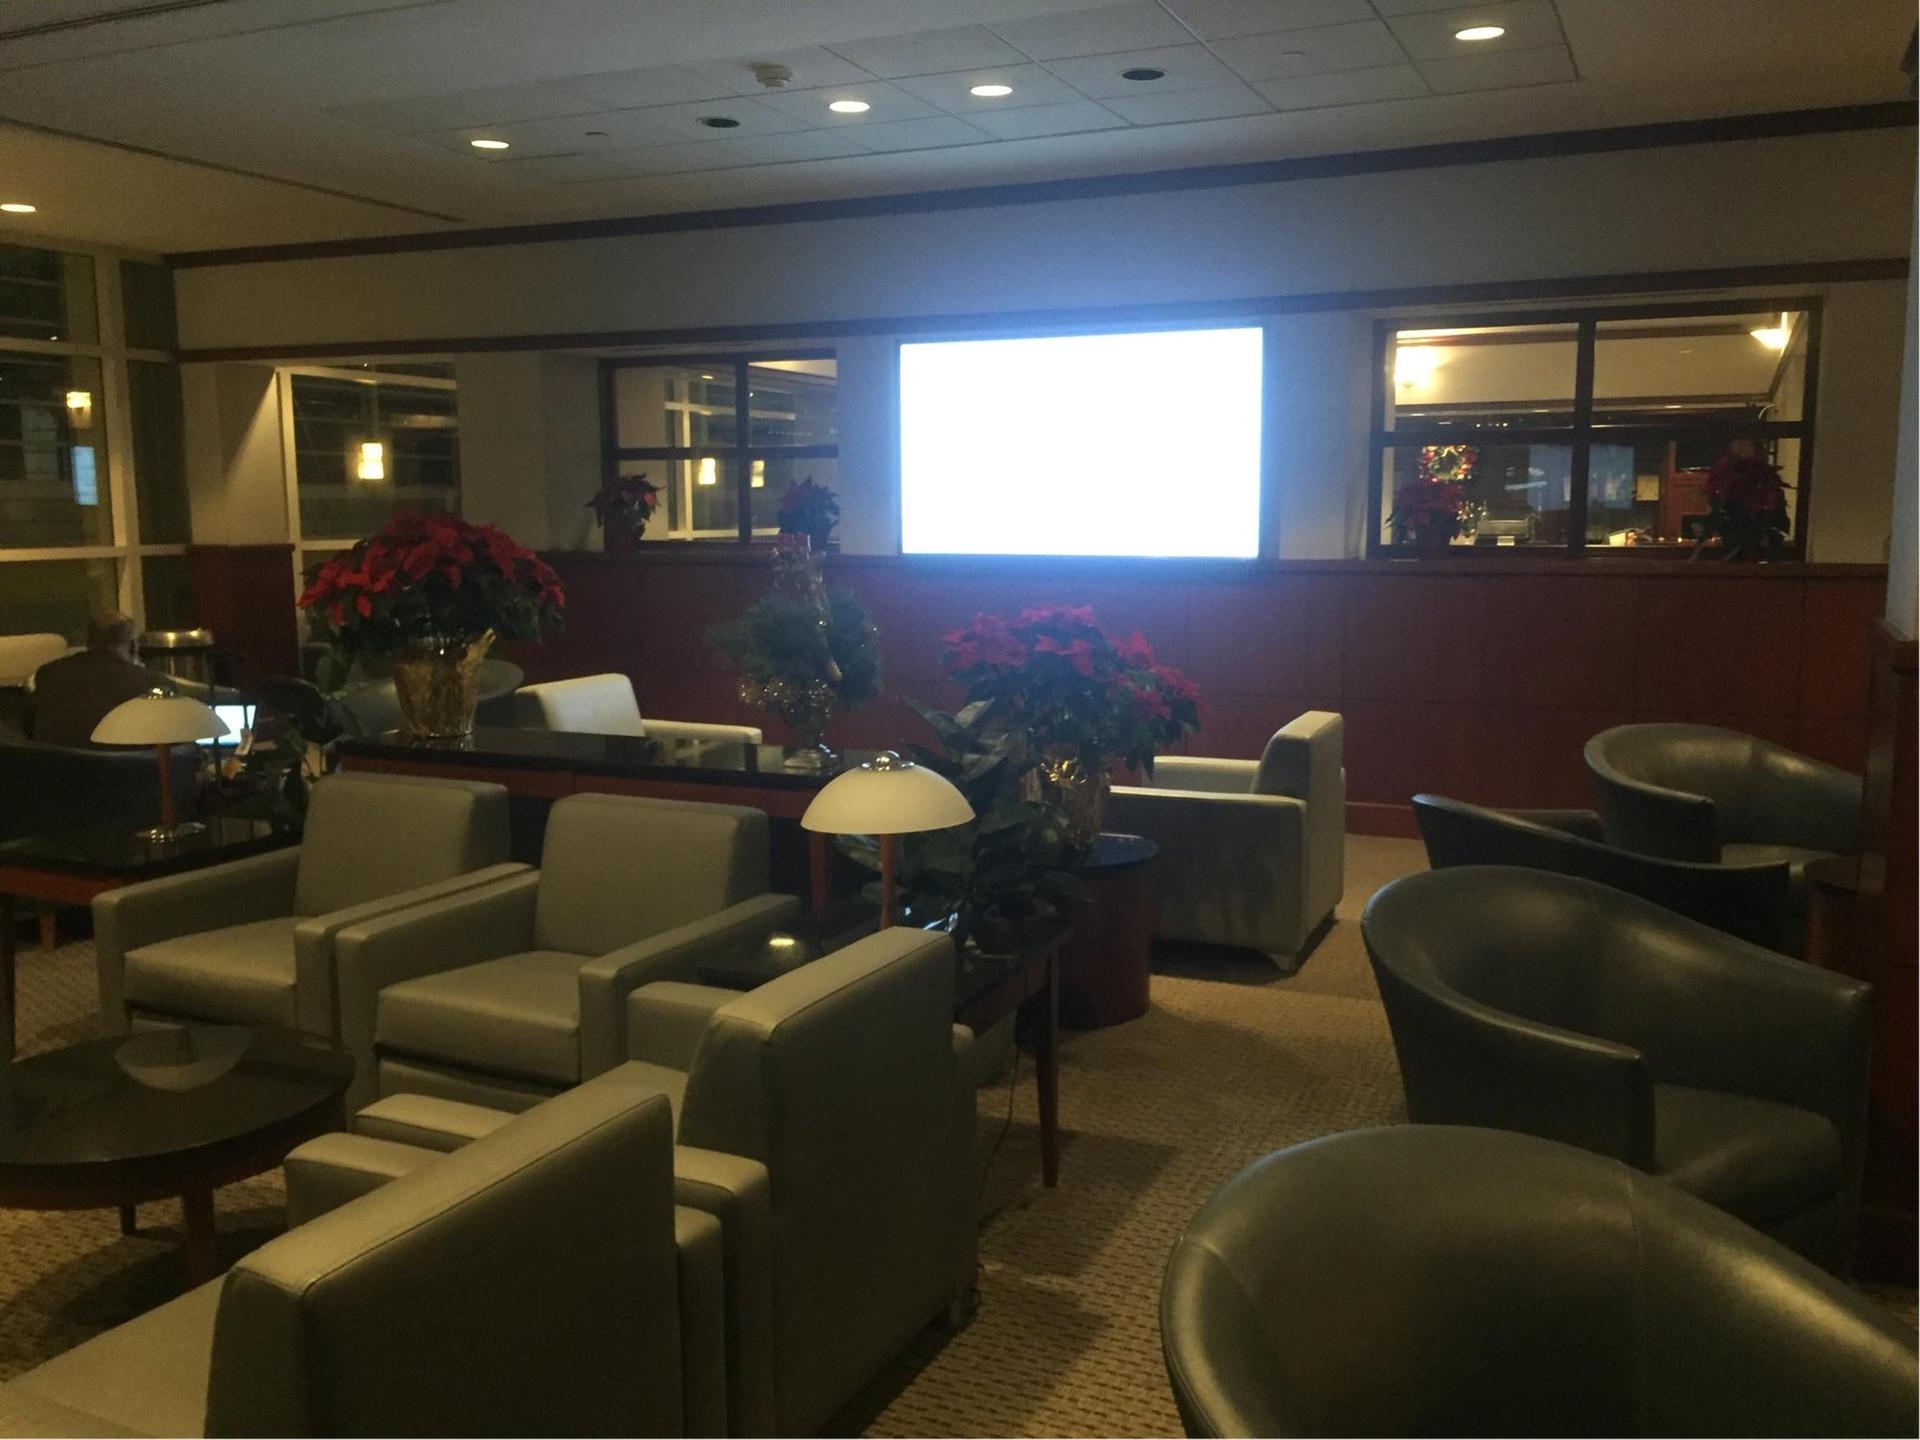 American Airlines Admirals Club image 19 of 19